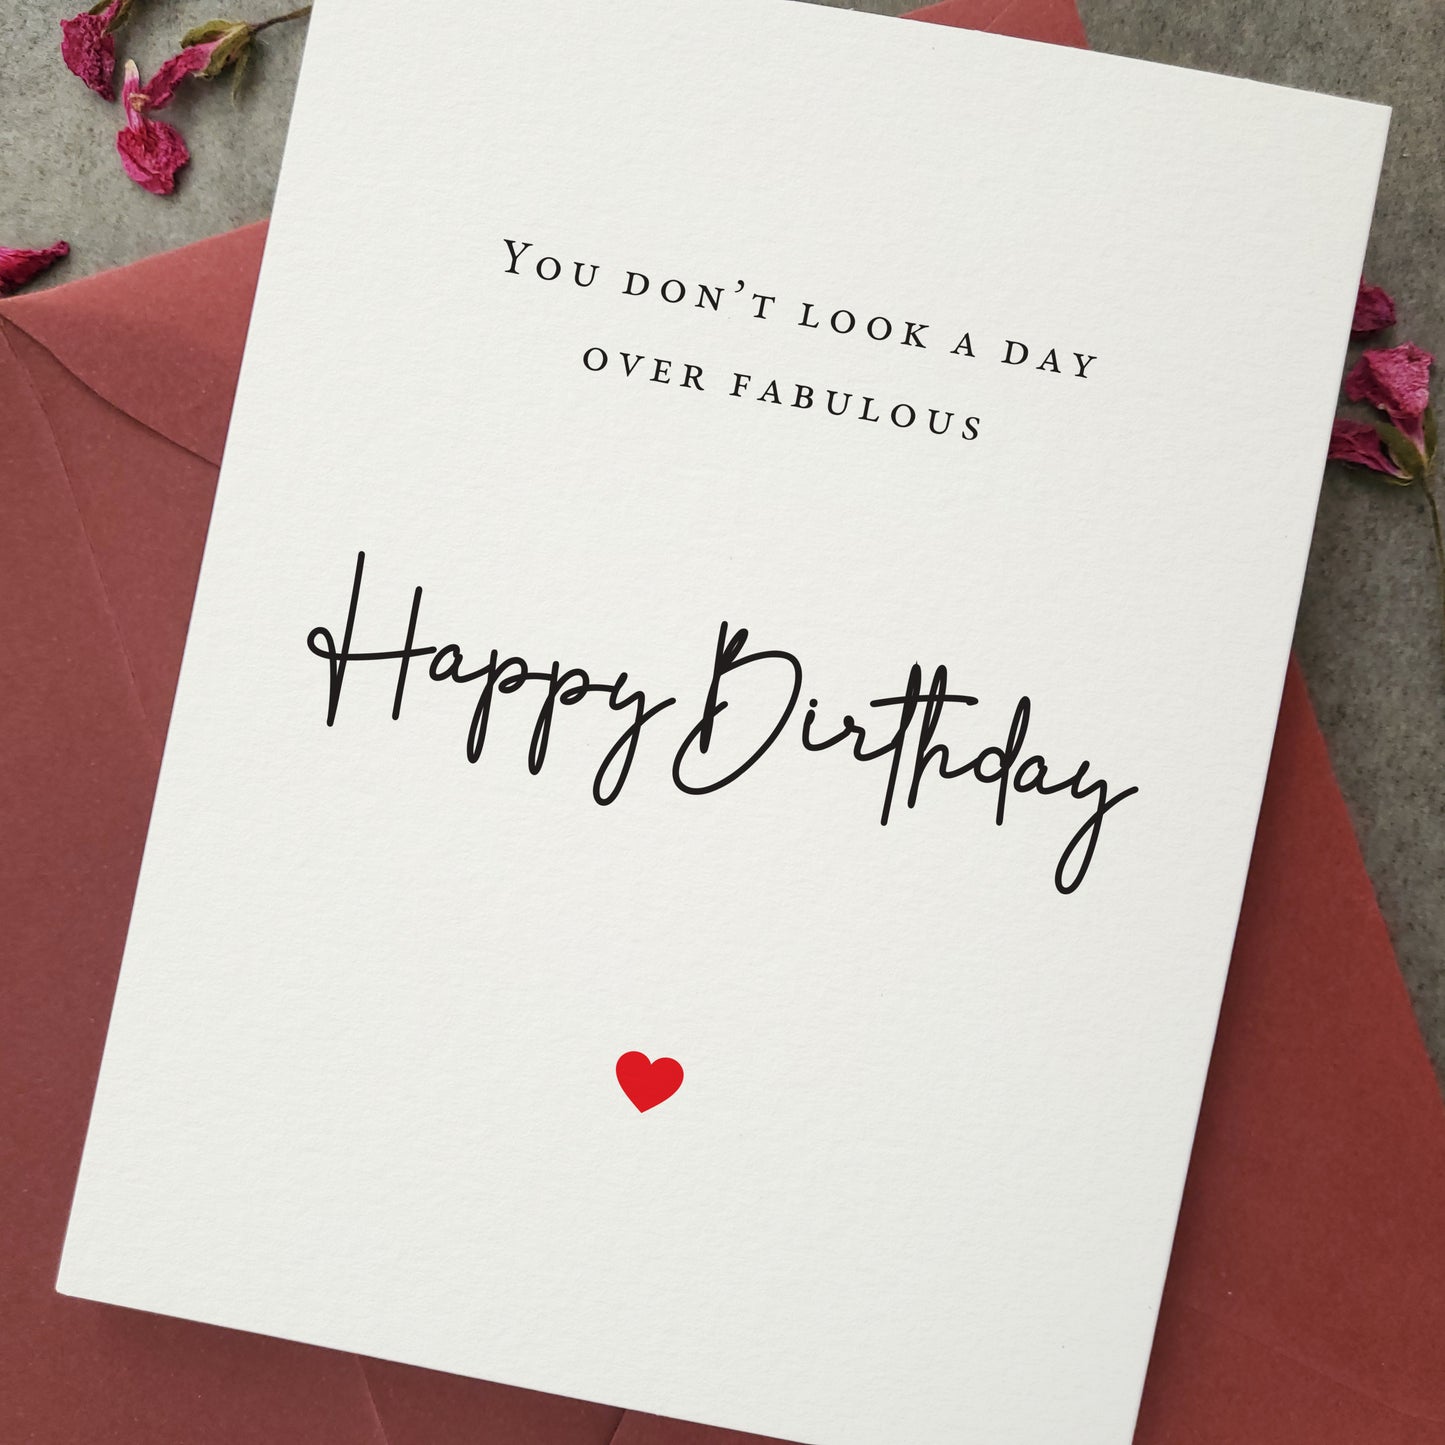 You don't look a day over fabulous birthday greeting card - XOXOKristen